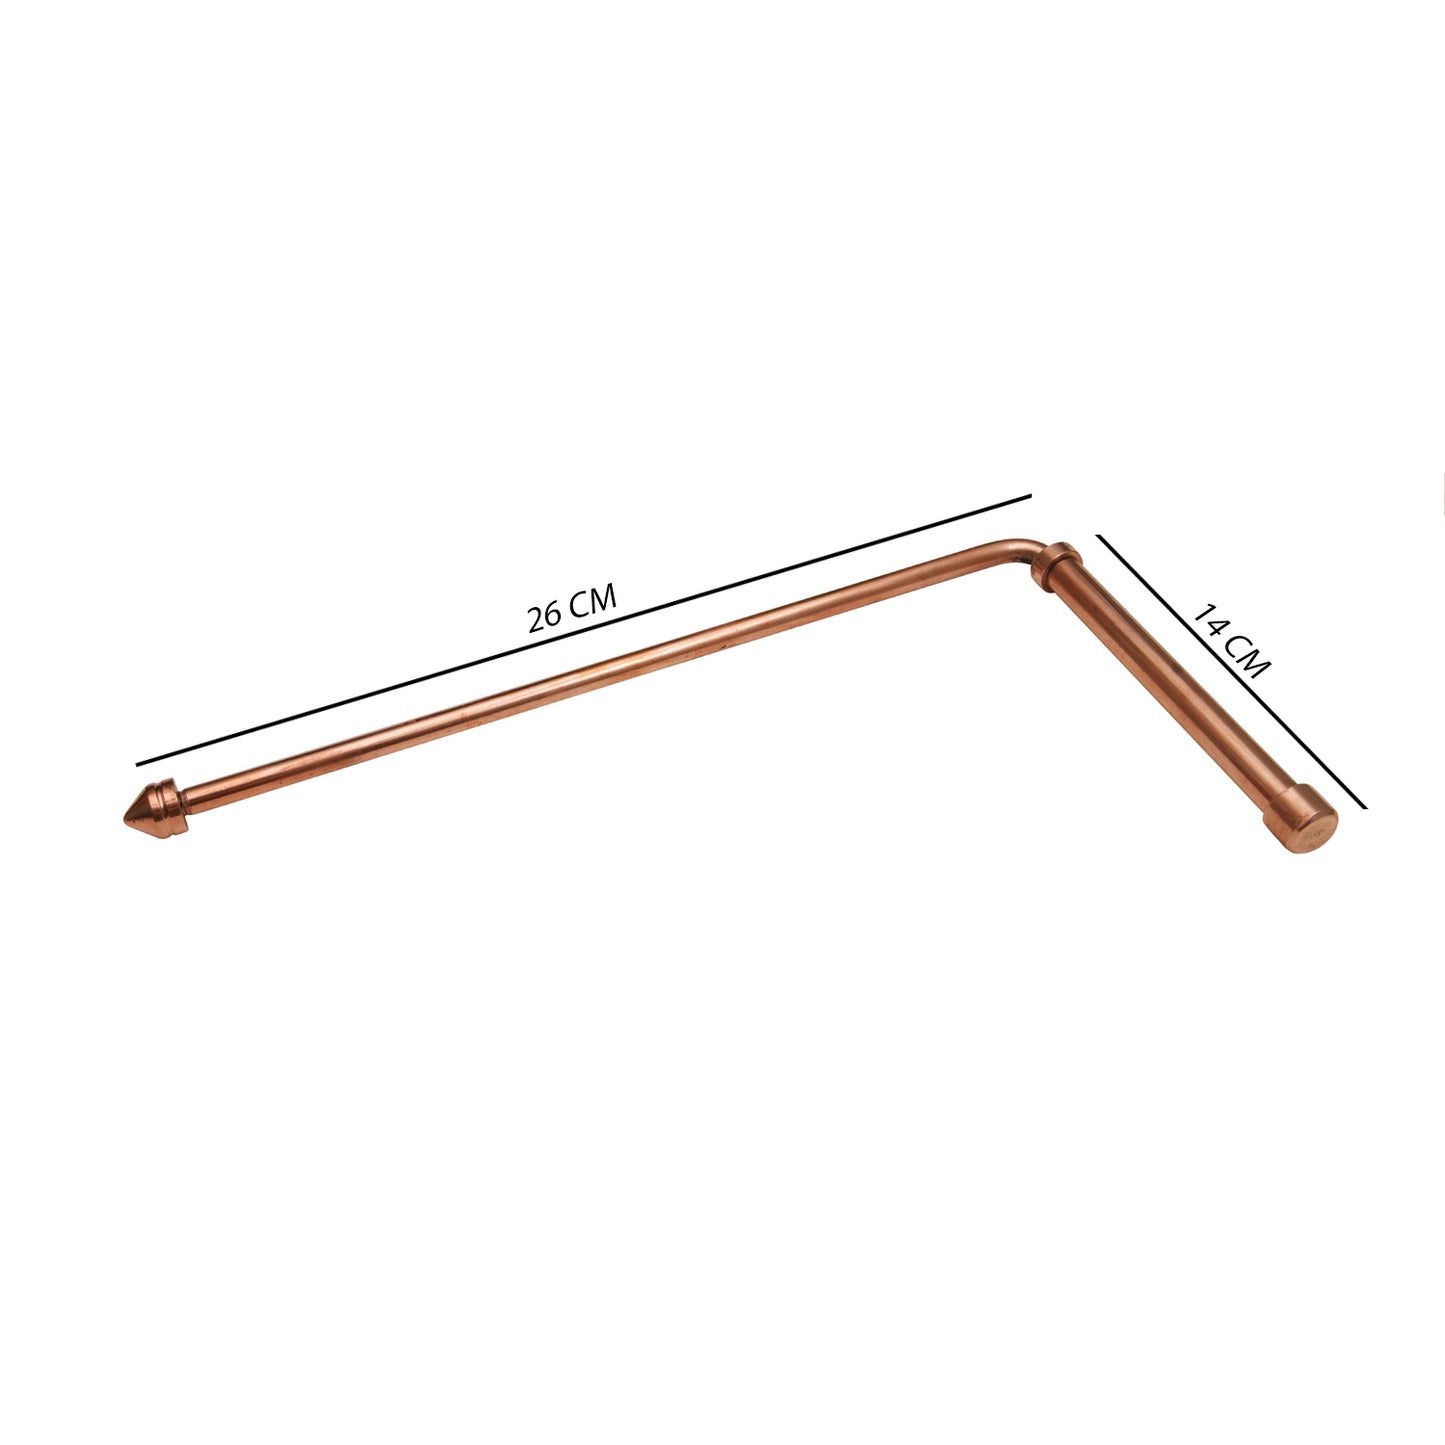 COPPER DOWSING ROD WITH METAL HANDLE